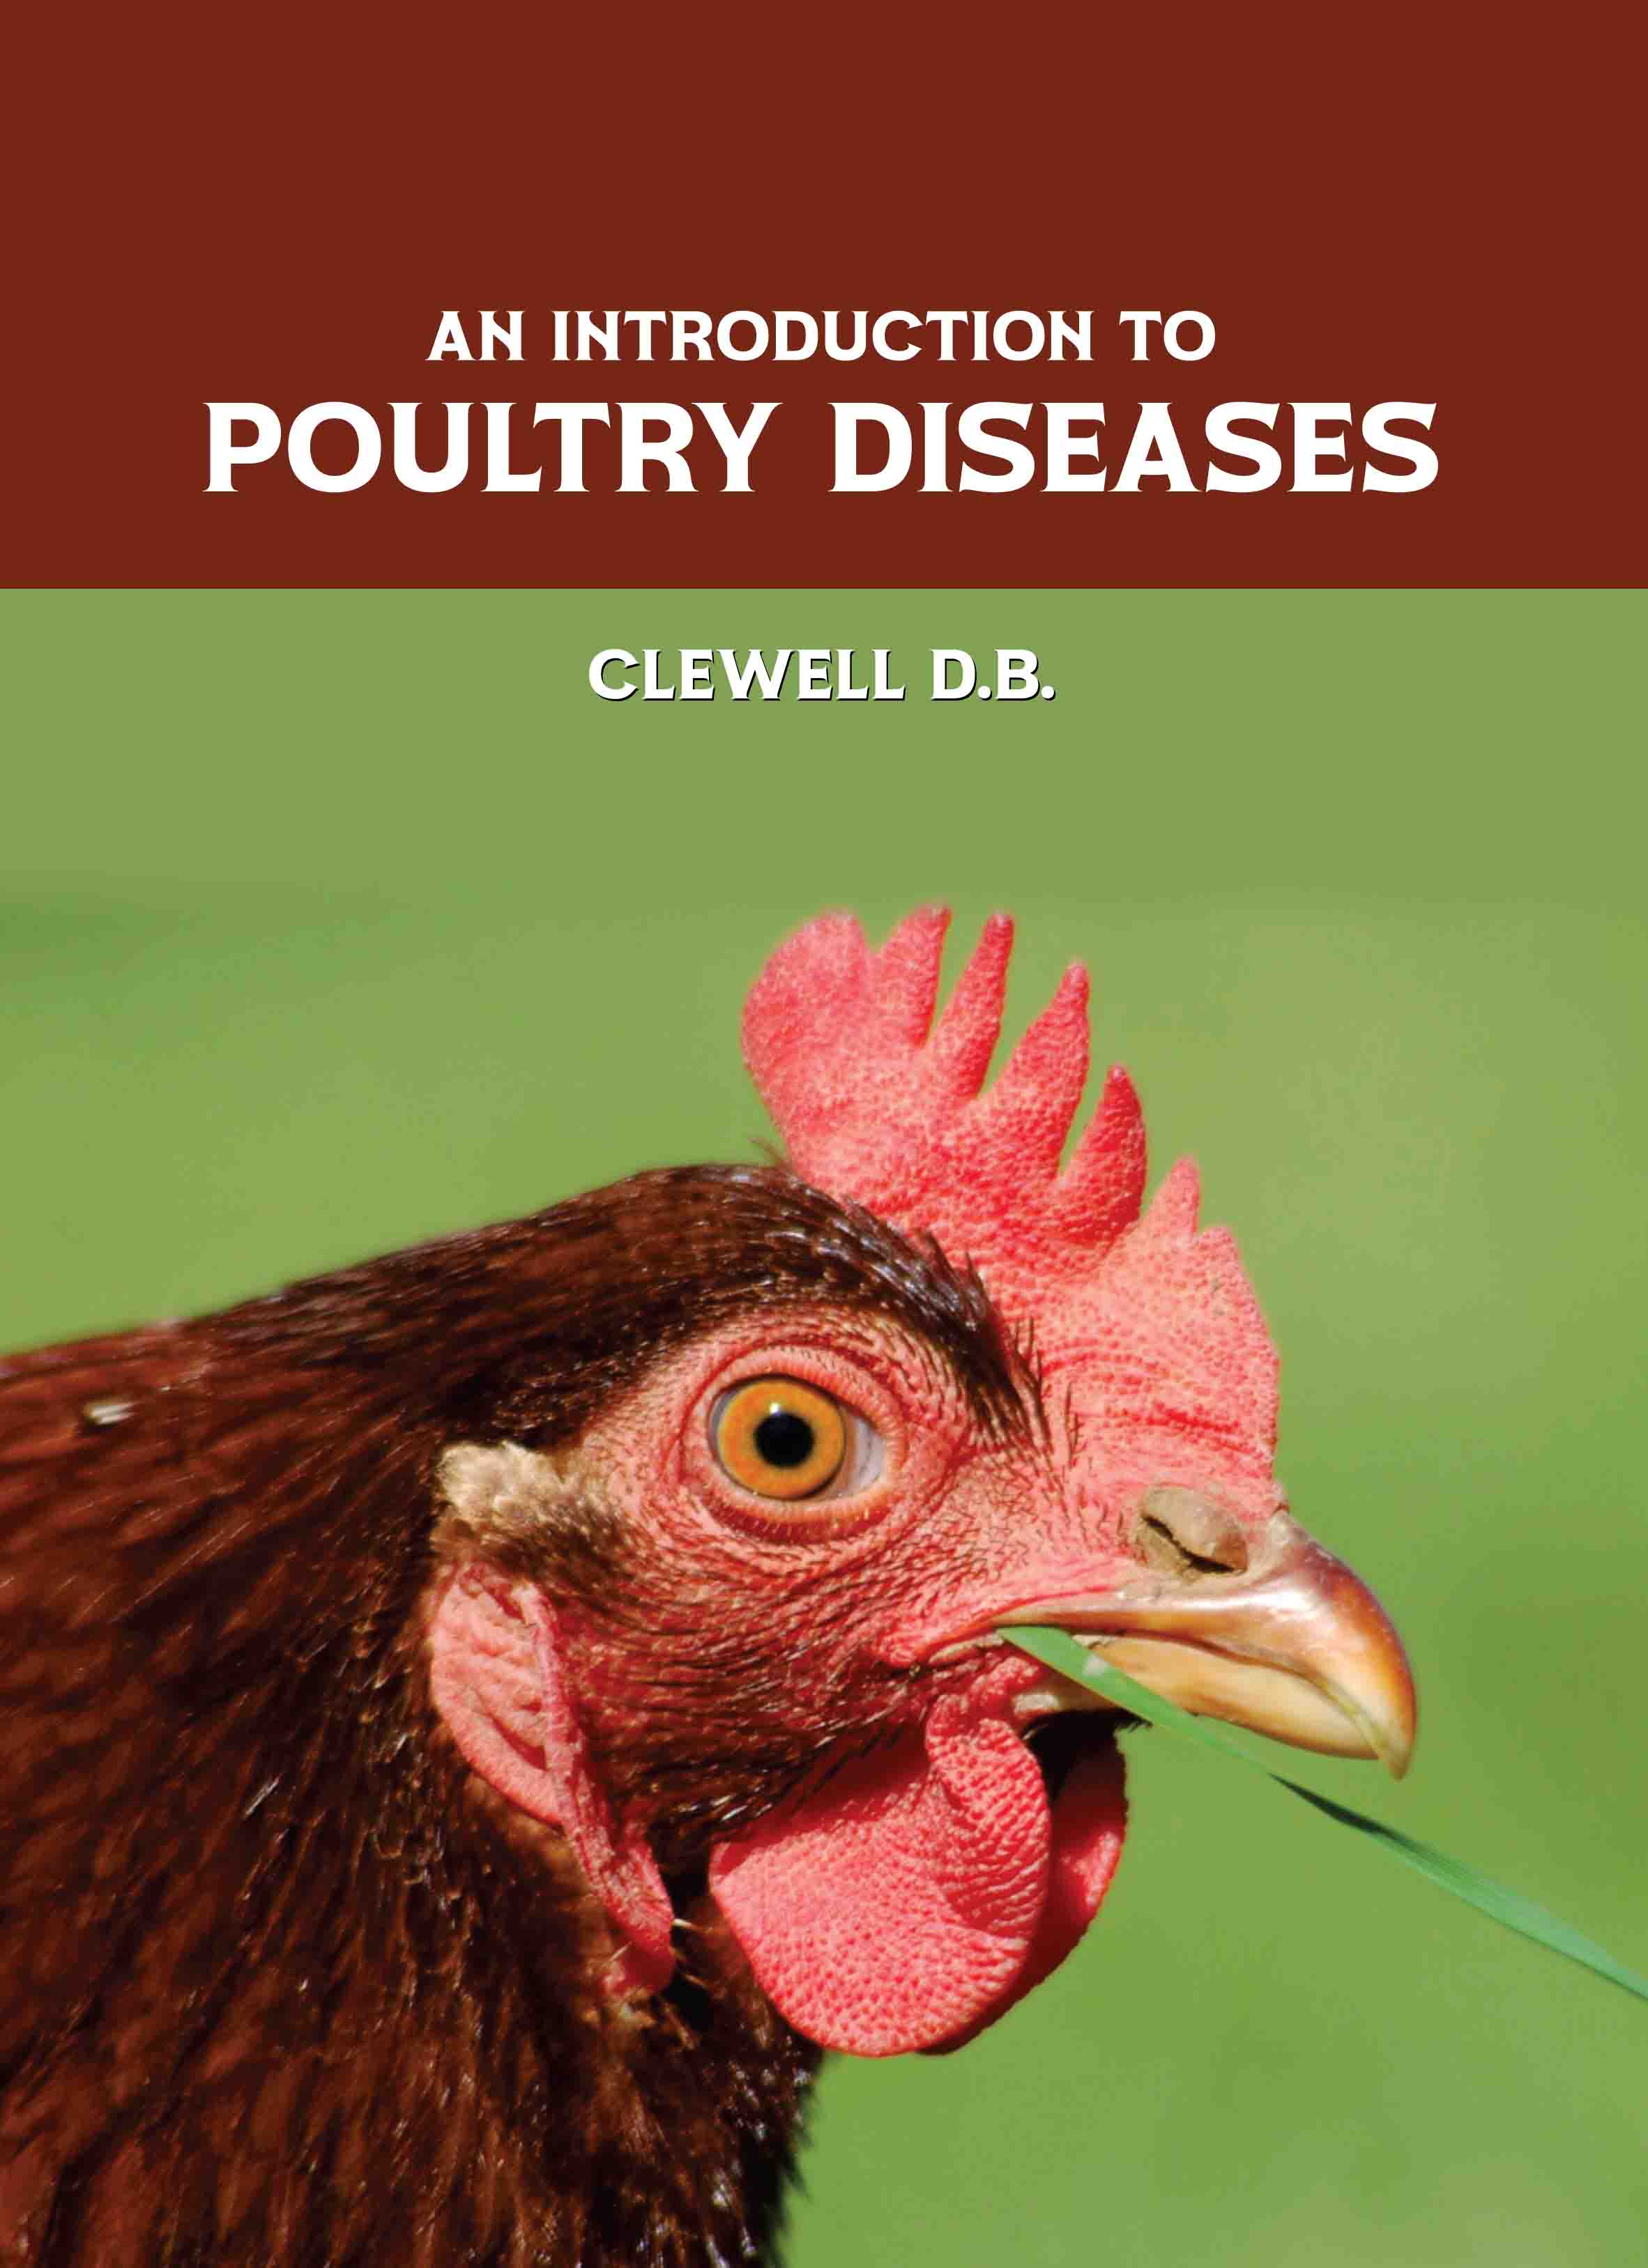 An Introduction to Poultry Diseases